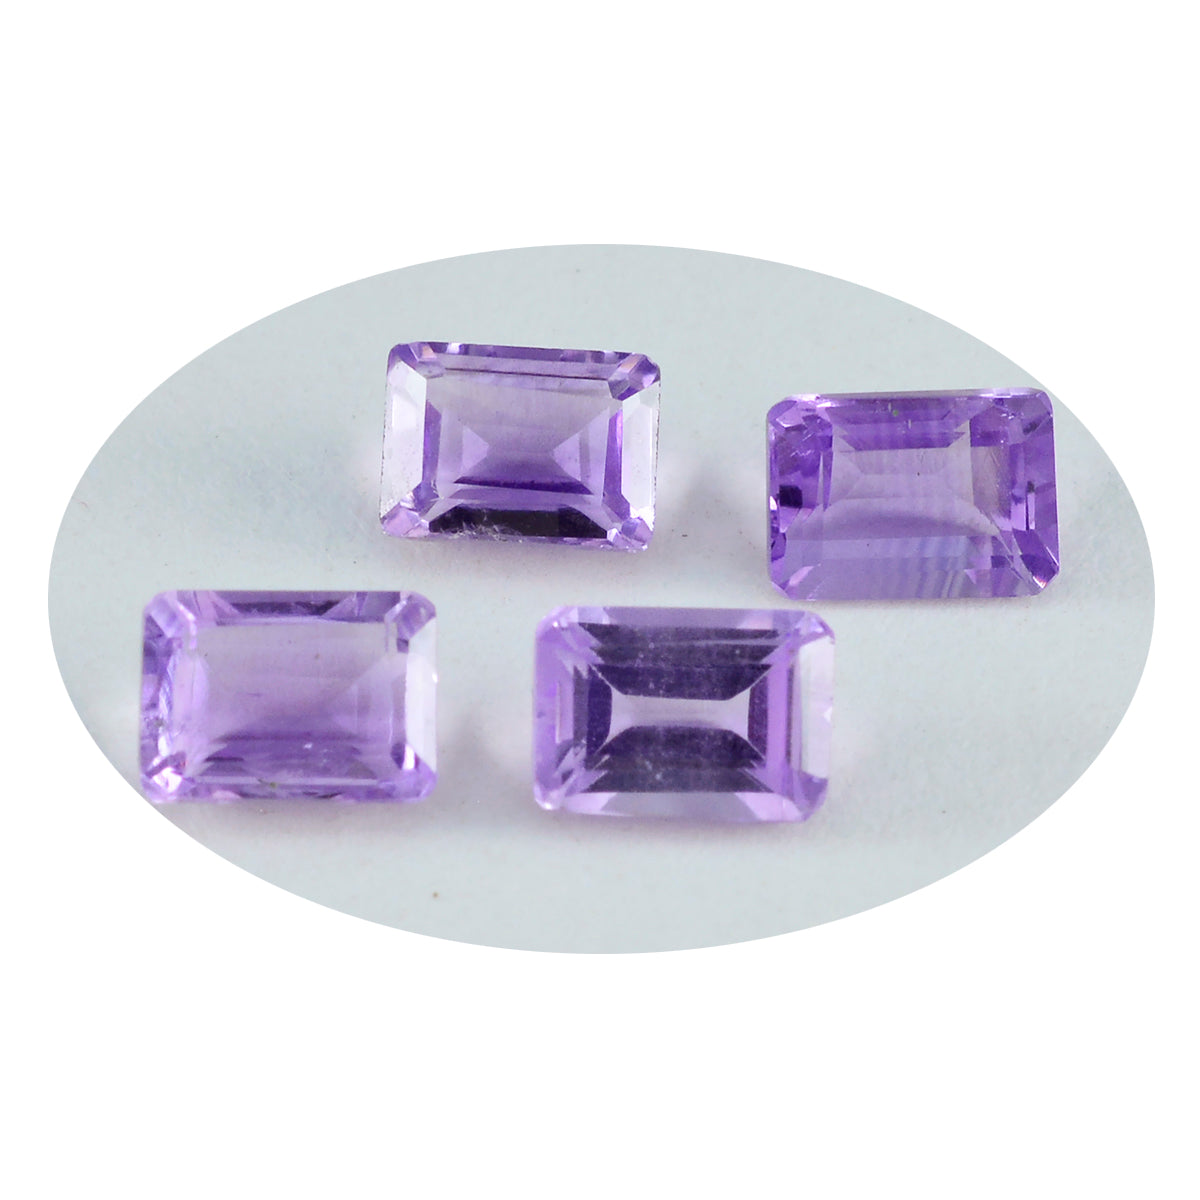 Riyogems 1PC Natural Purple Amethyst Faceted 7X9 mm Octagon Shape A+ Quality Stone